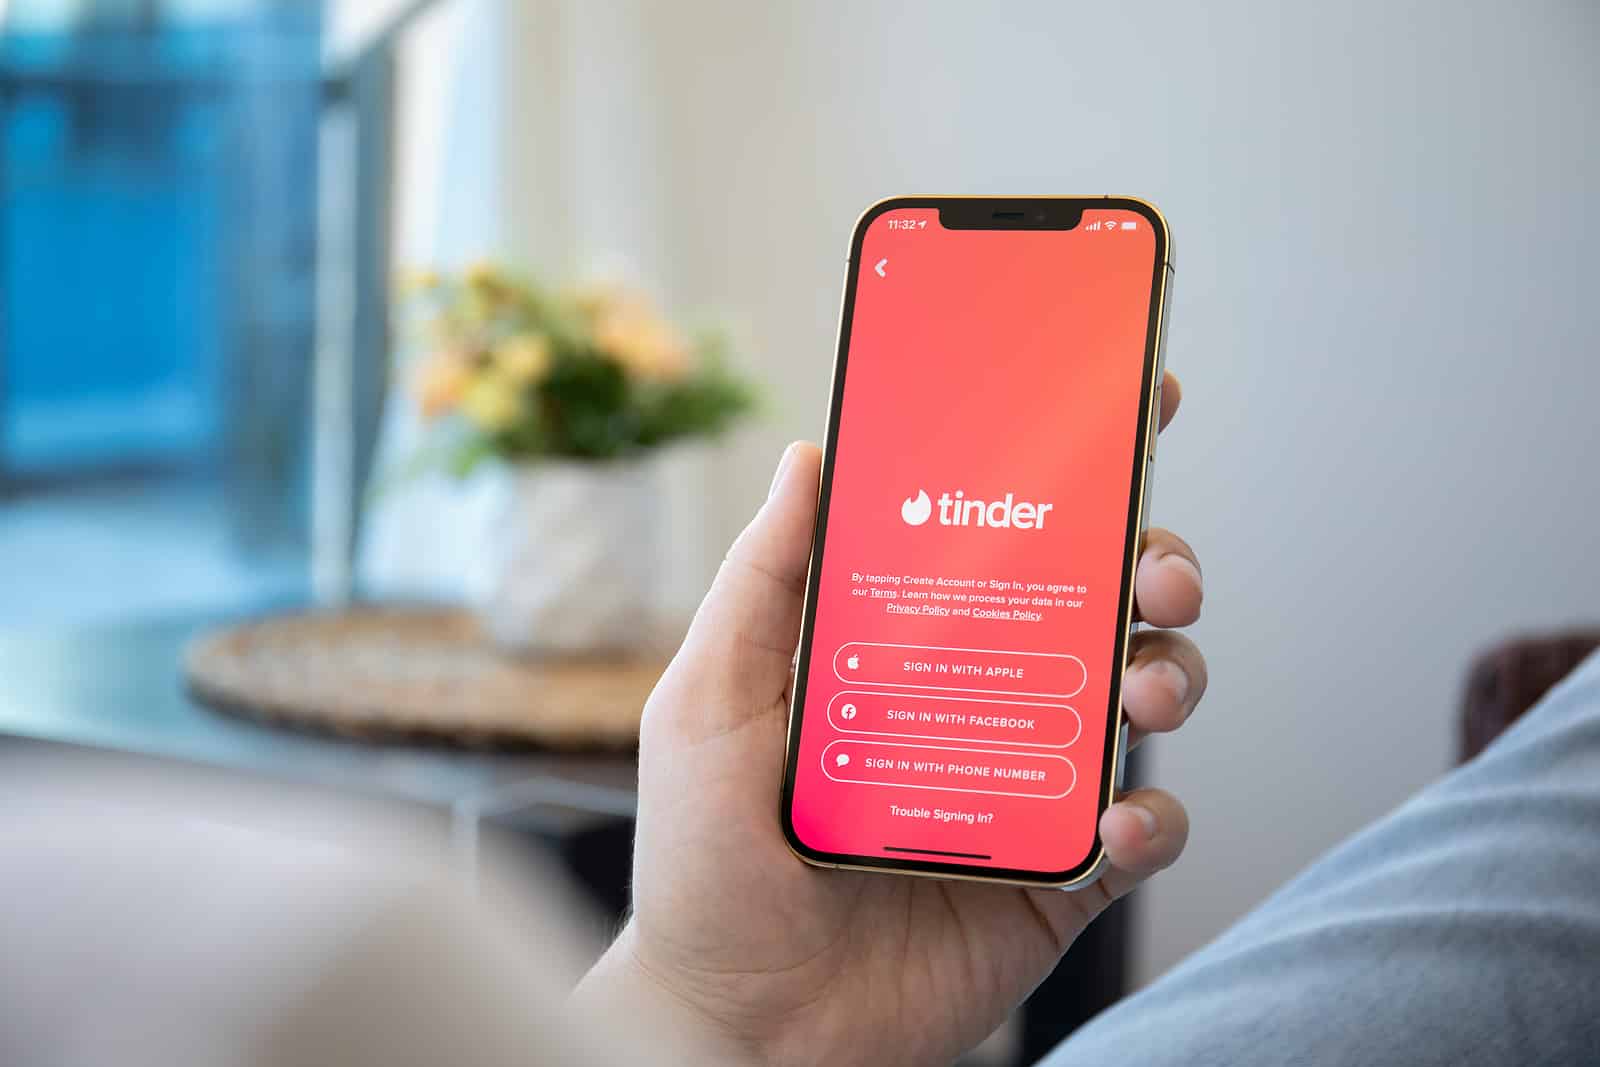 How To Hook Up On Tinder In 2022 (Players Guide)